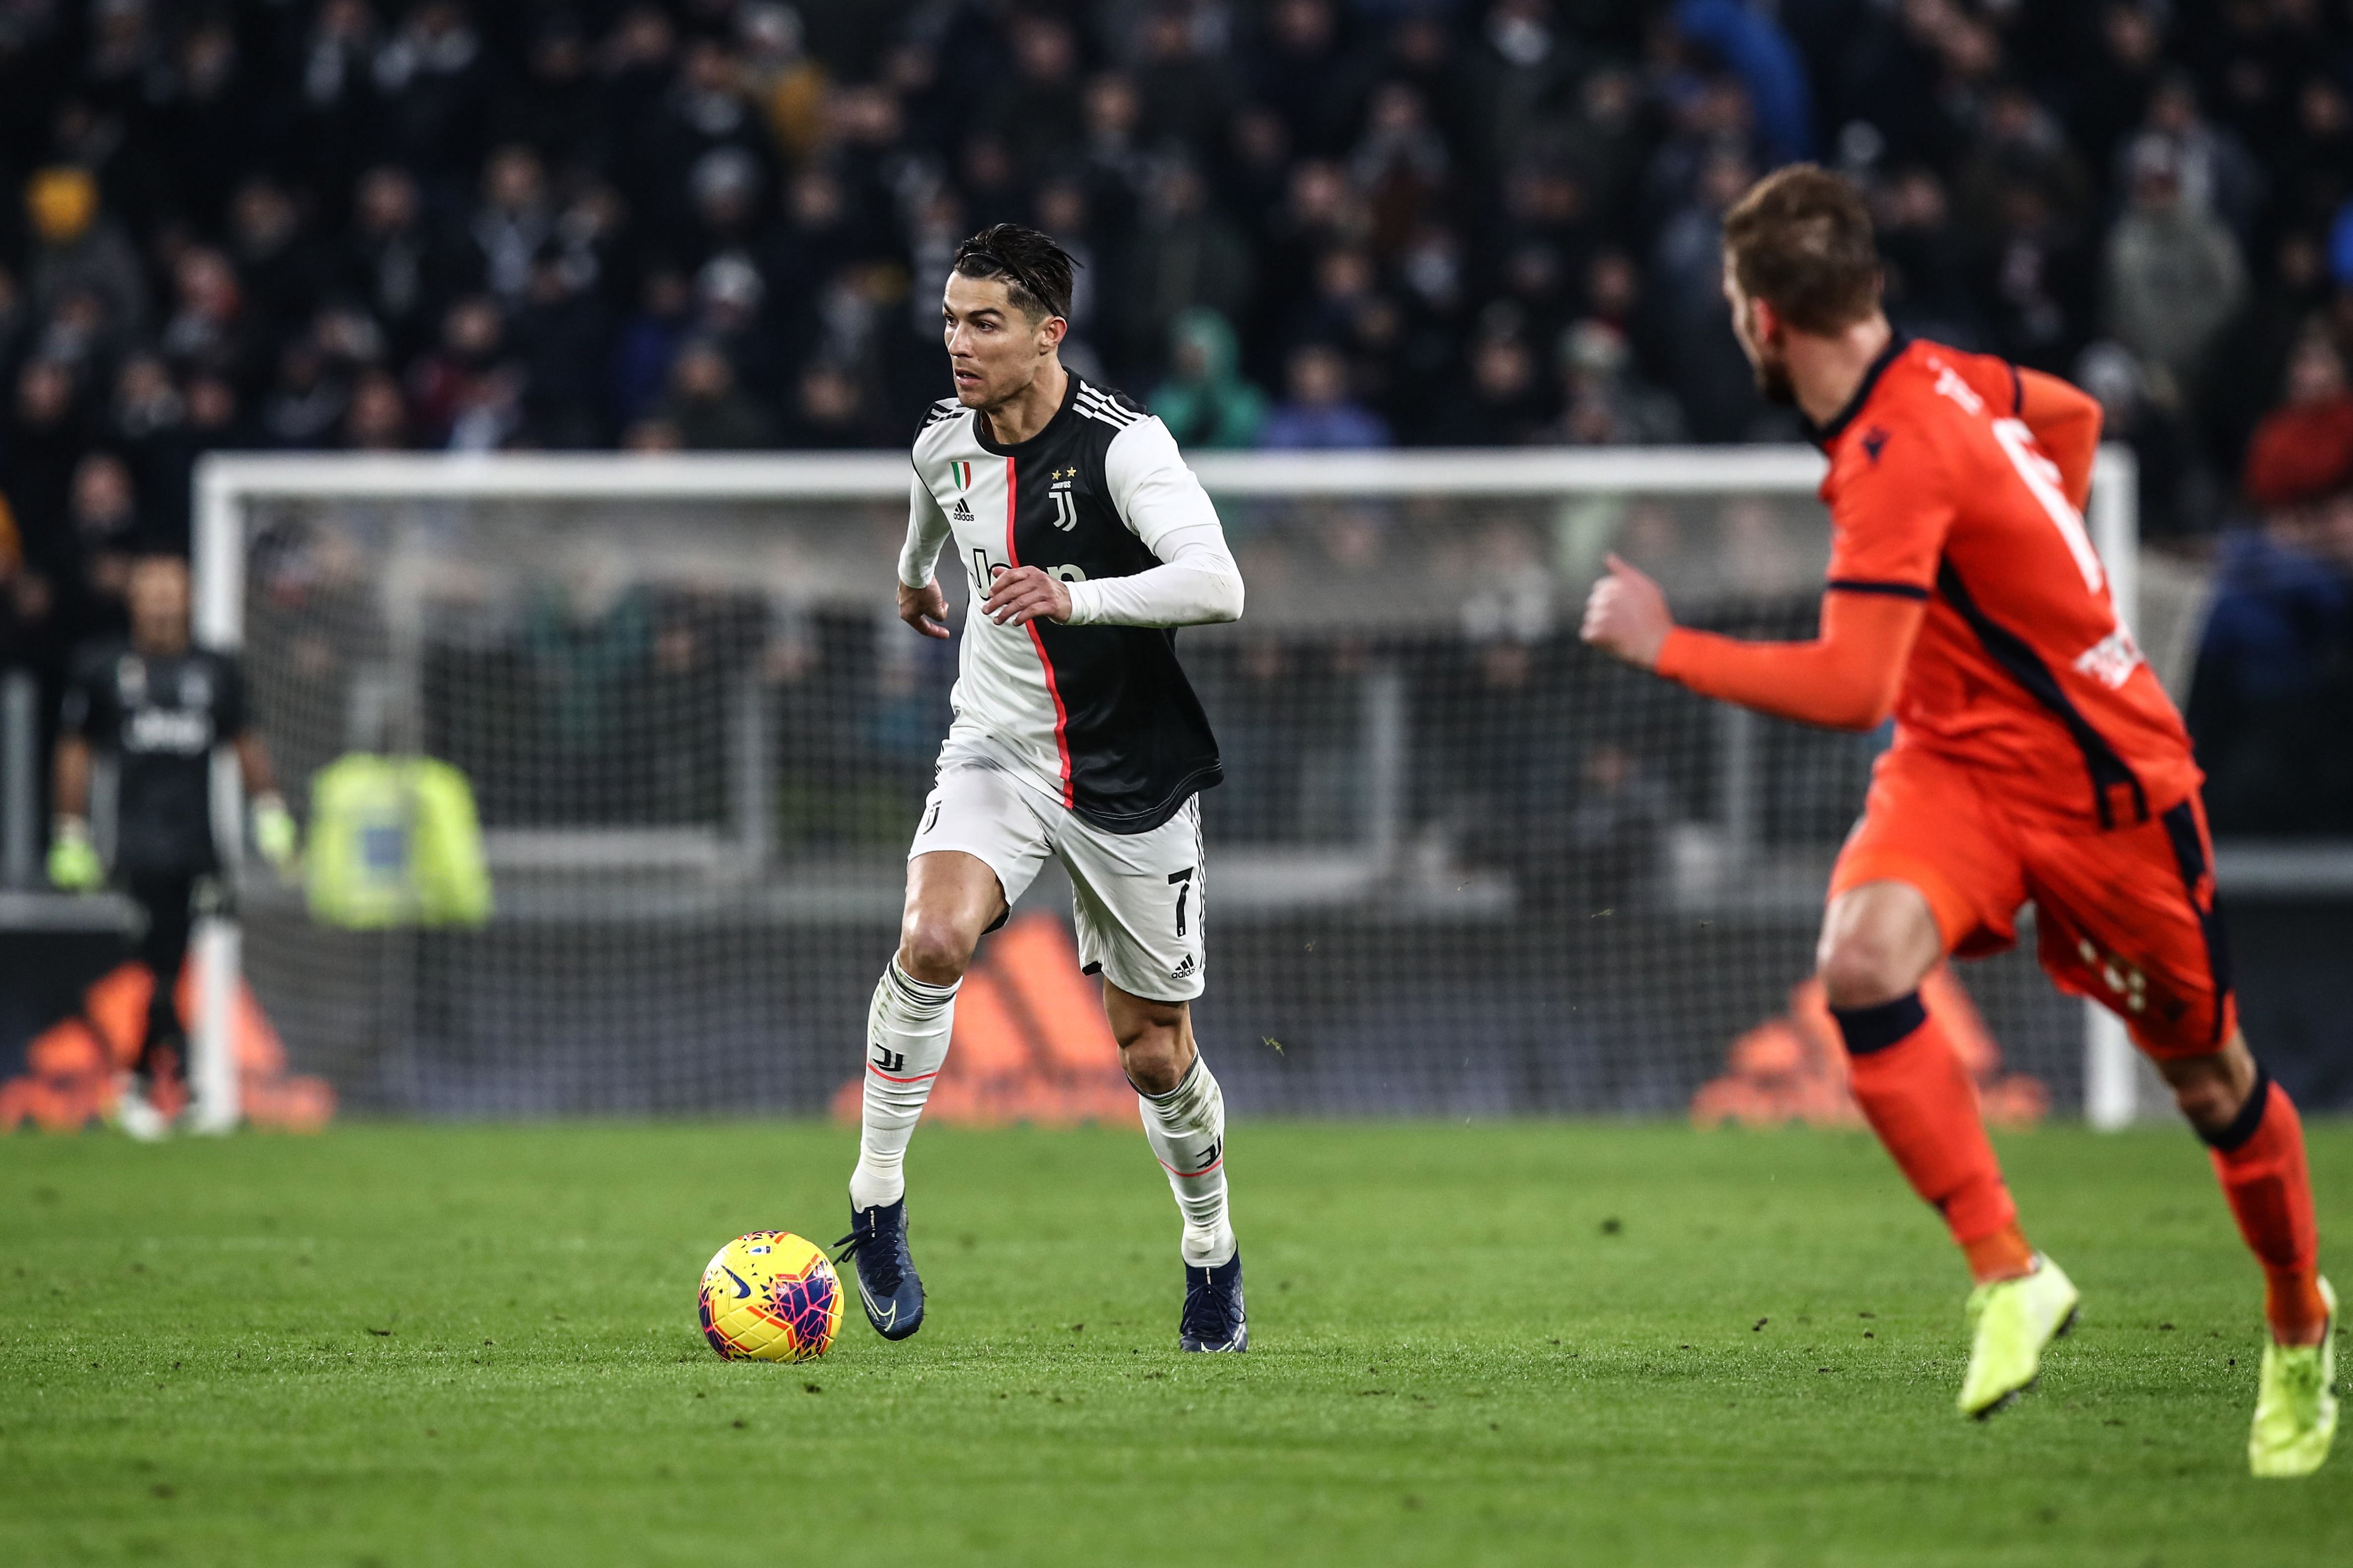 Juventus' Portuguese forward Cristiano Ronaldo runs with the ball during the Italian Serie A football match Juventus vs Udinese. (AFP Photo)